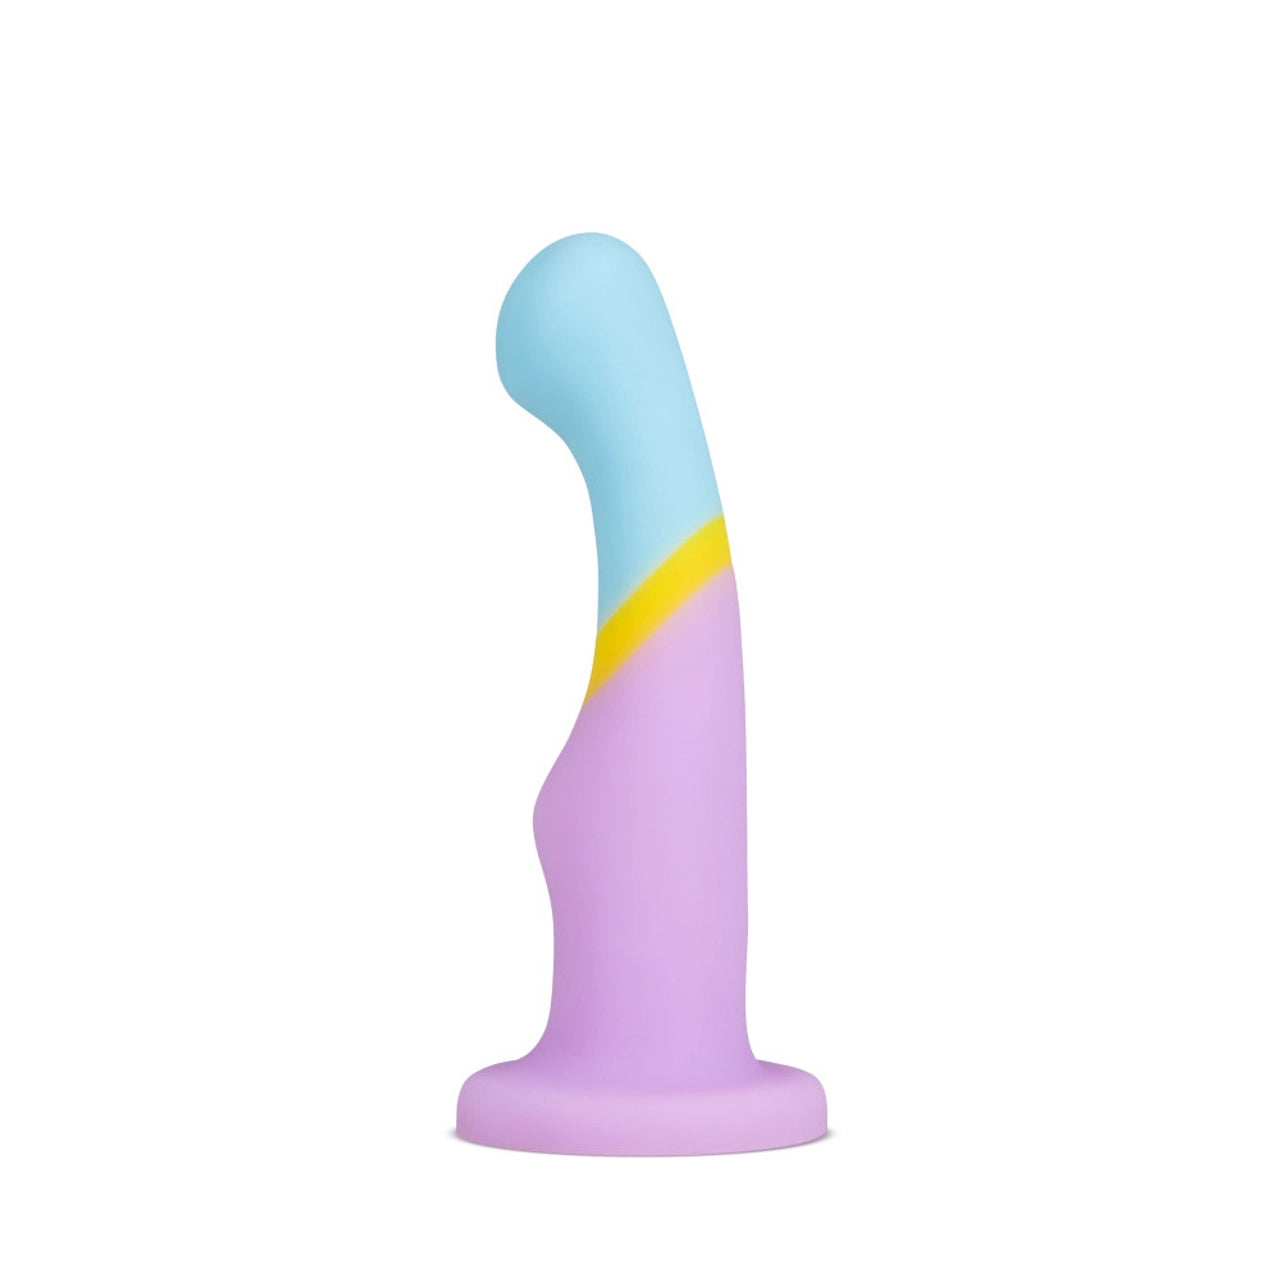 Avant D14 Heart Of Gold Silicone Dildo 6 inch